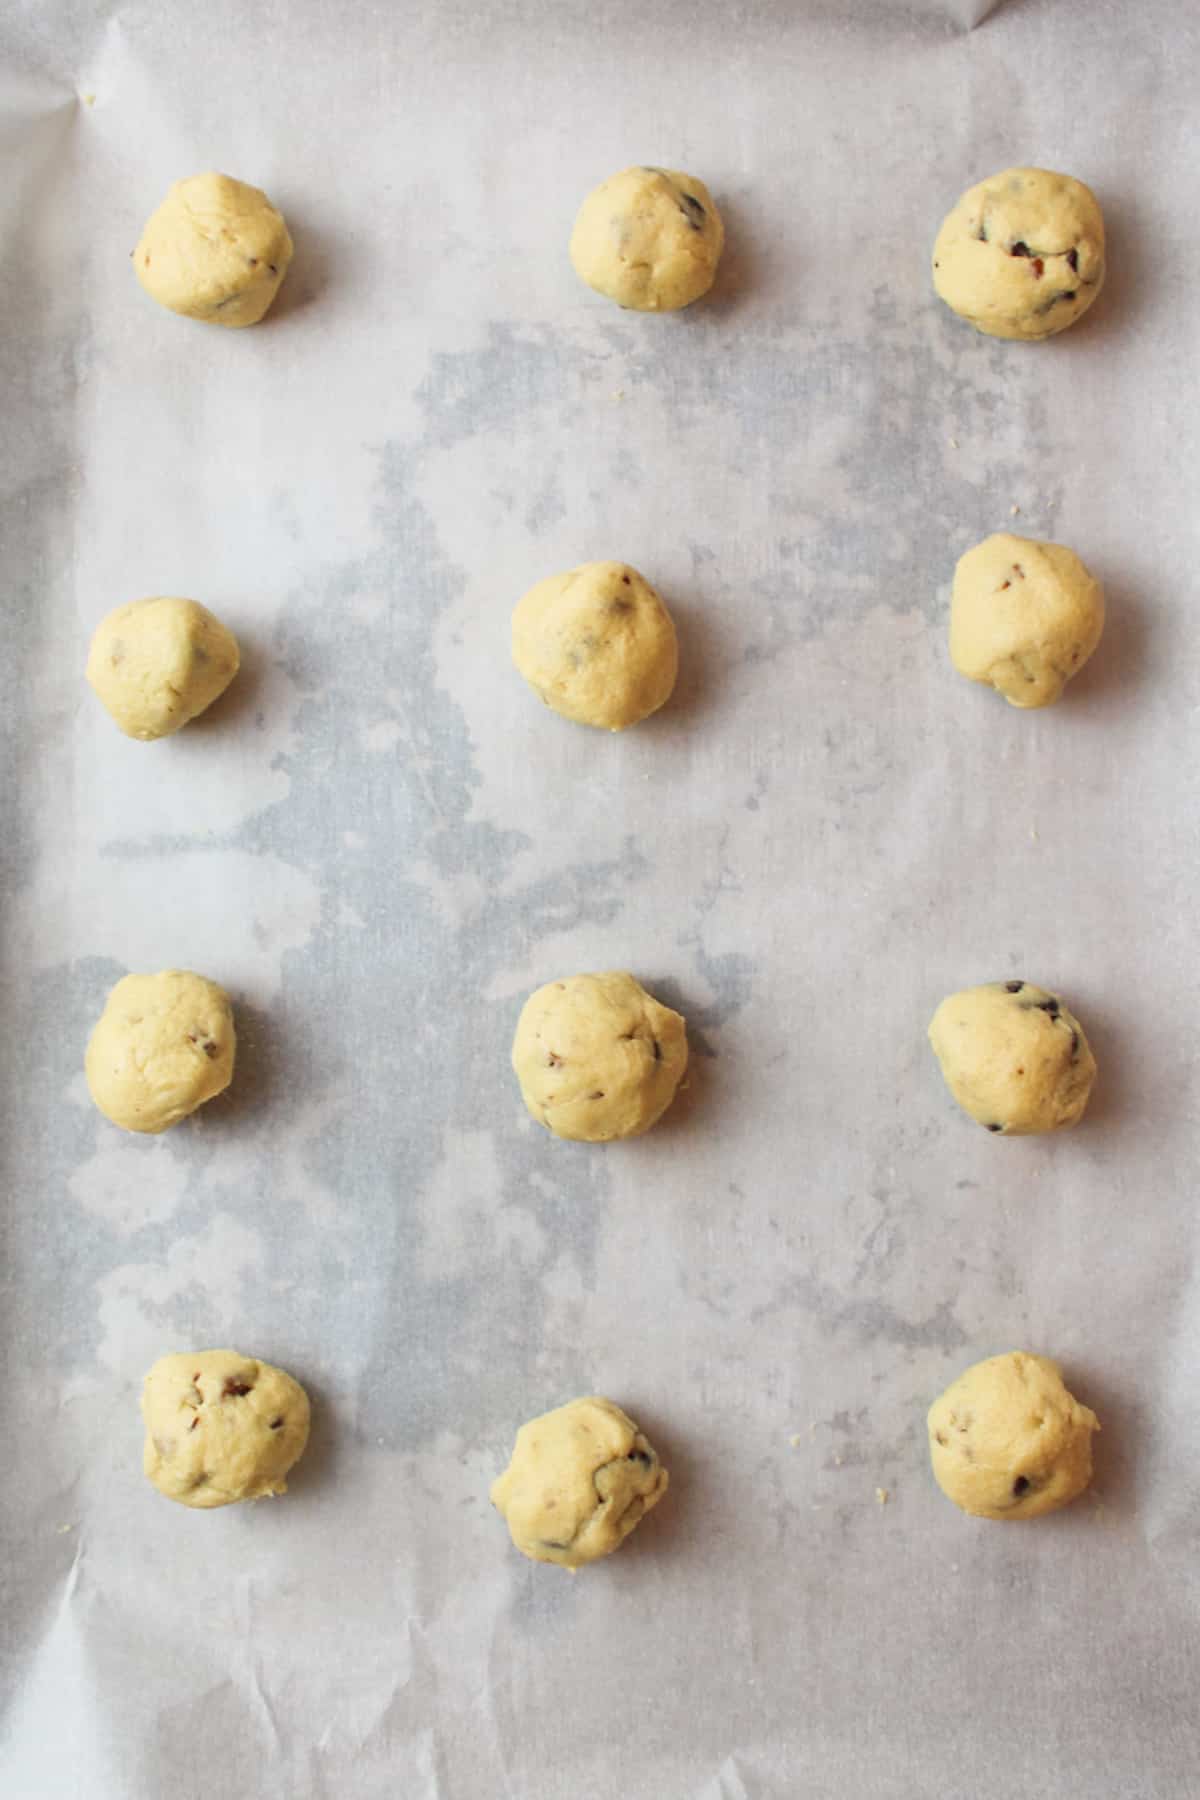 scooped balls of chocolate chip pecan cookie dough on a parchment paper lined baking sheet